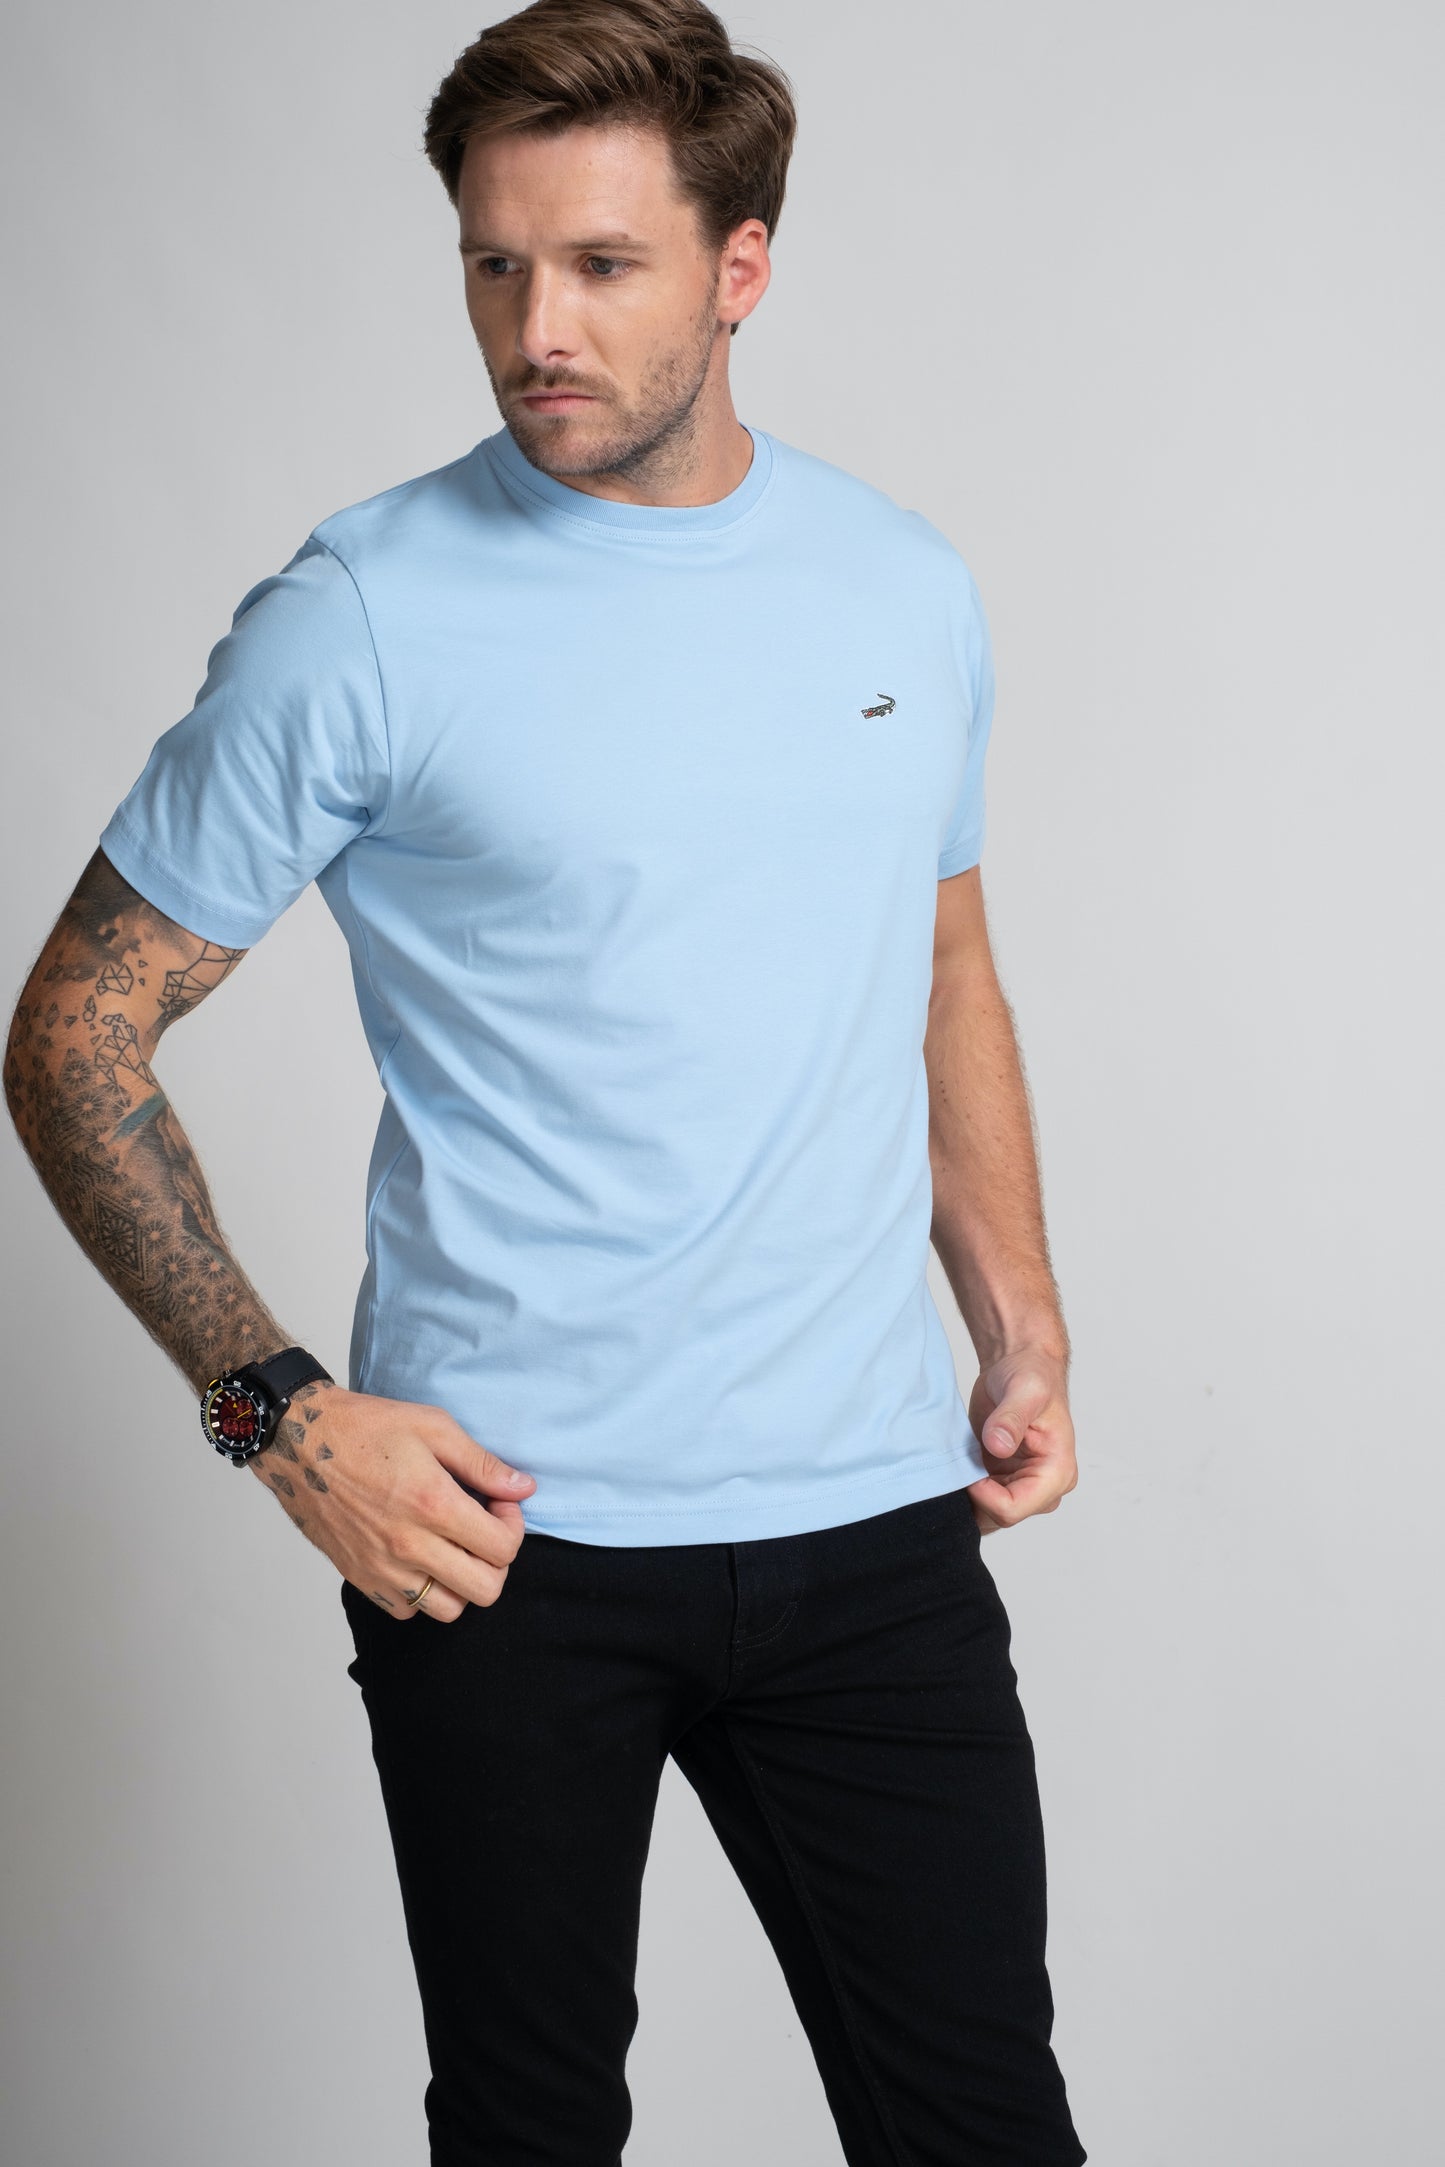 Classic Fit Short sleeves-CasualCrew Neck - Blue Bell